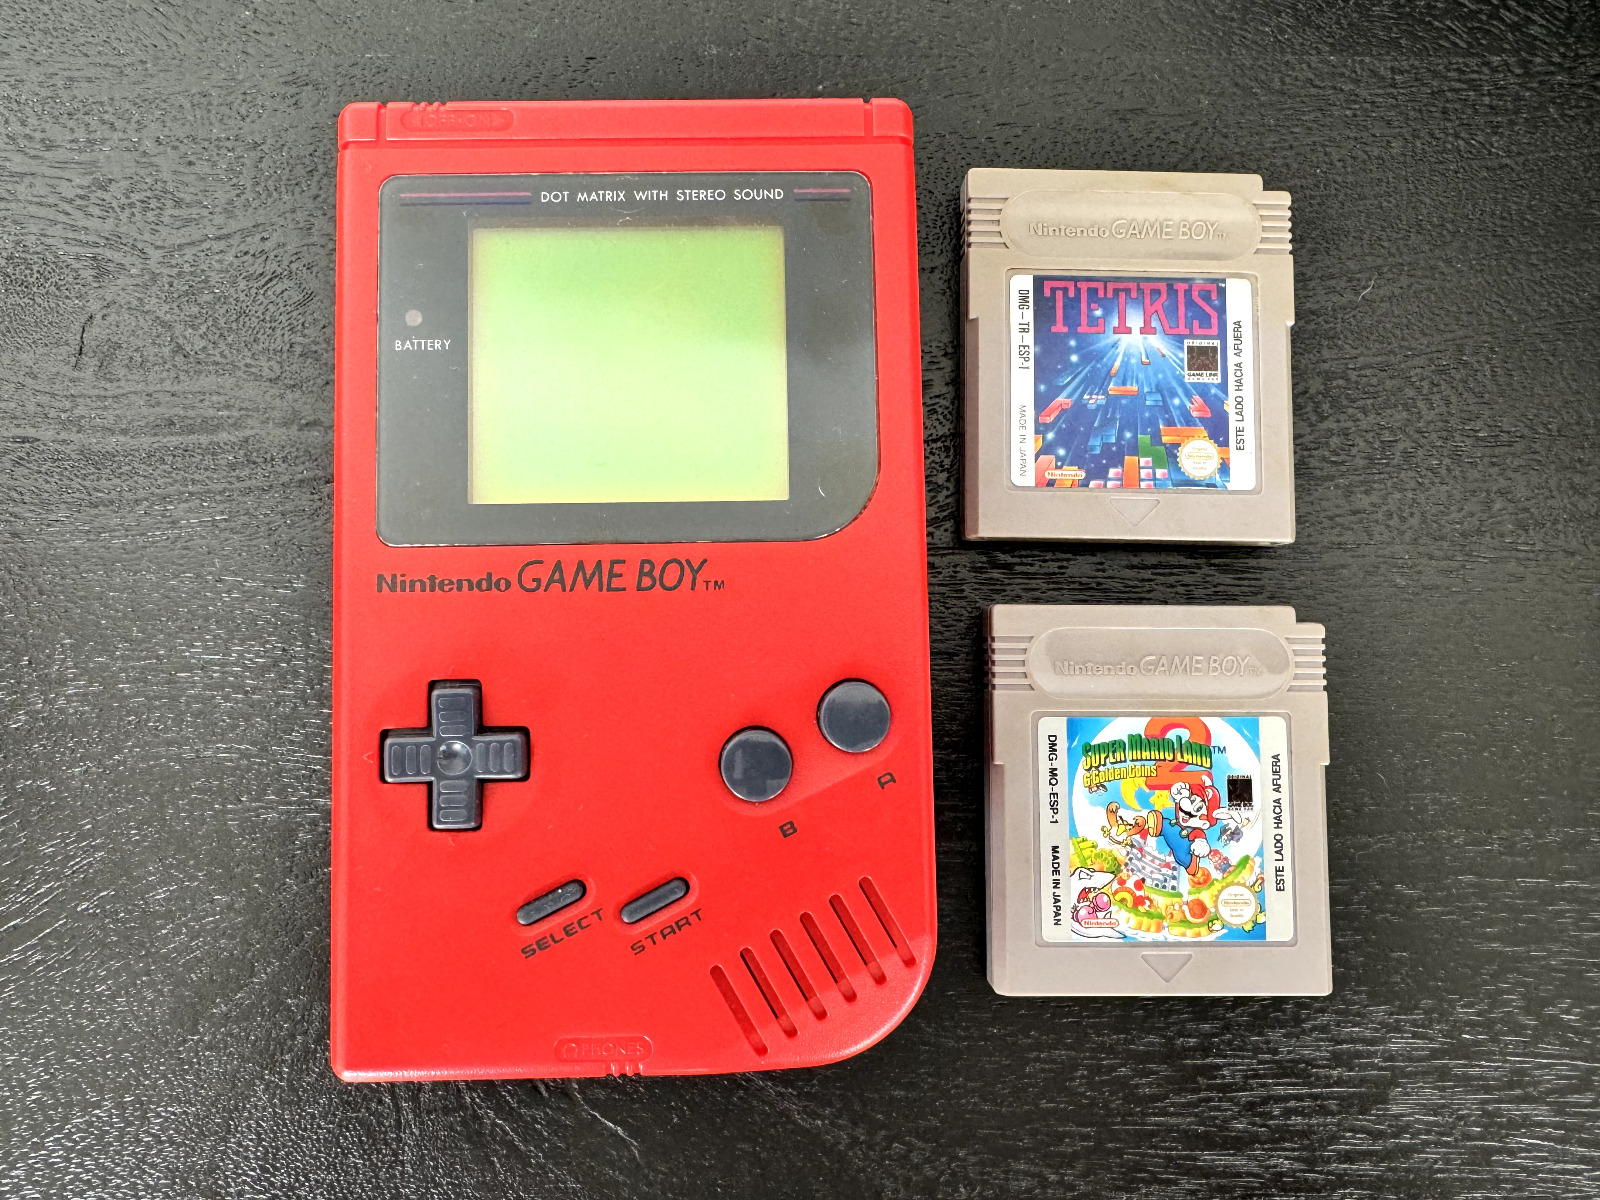 Game Boy Classic DMG-01 in good condition. With game Tetris y Super Mario Land 2